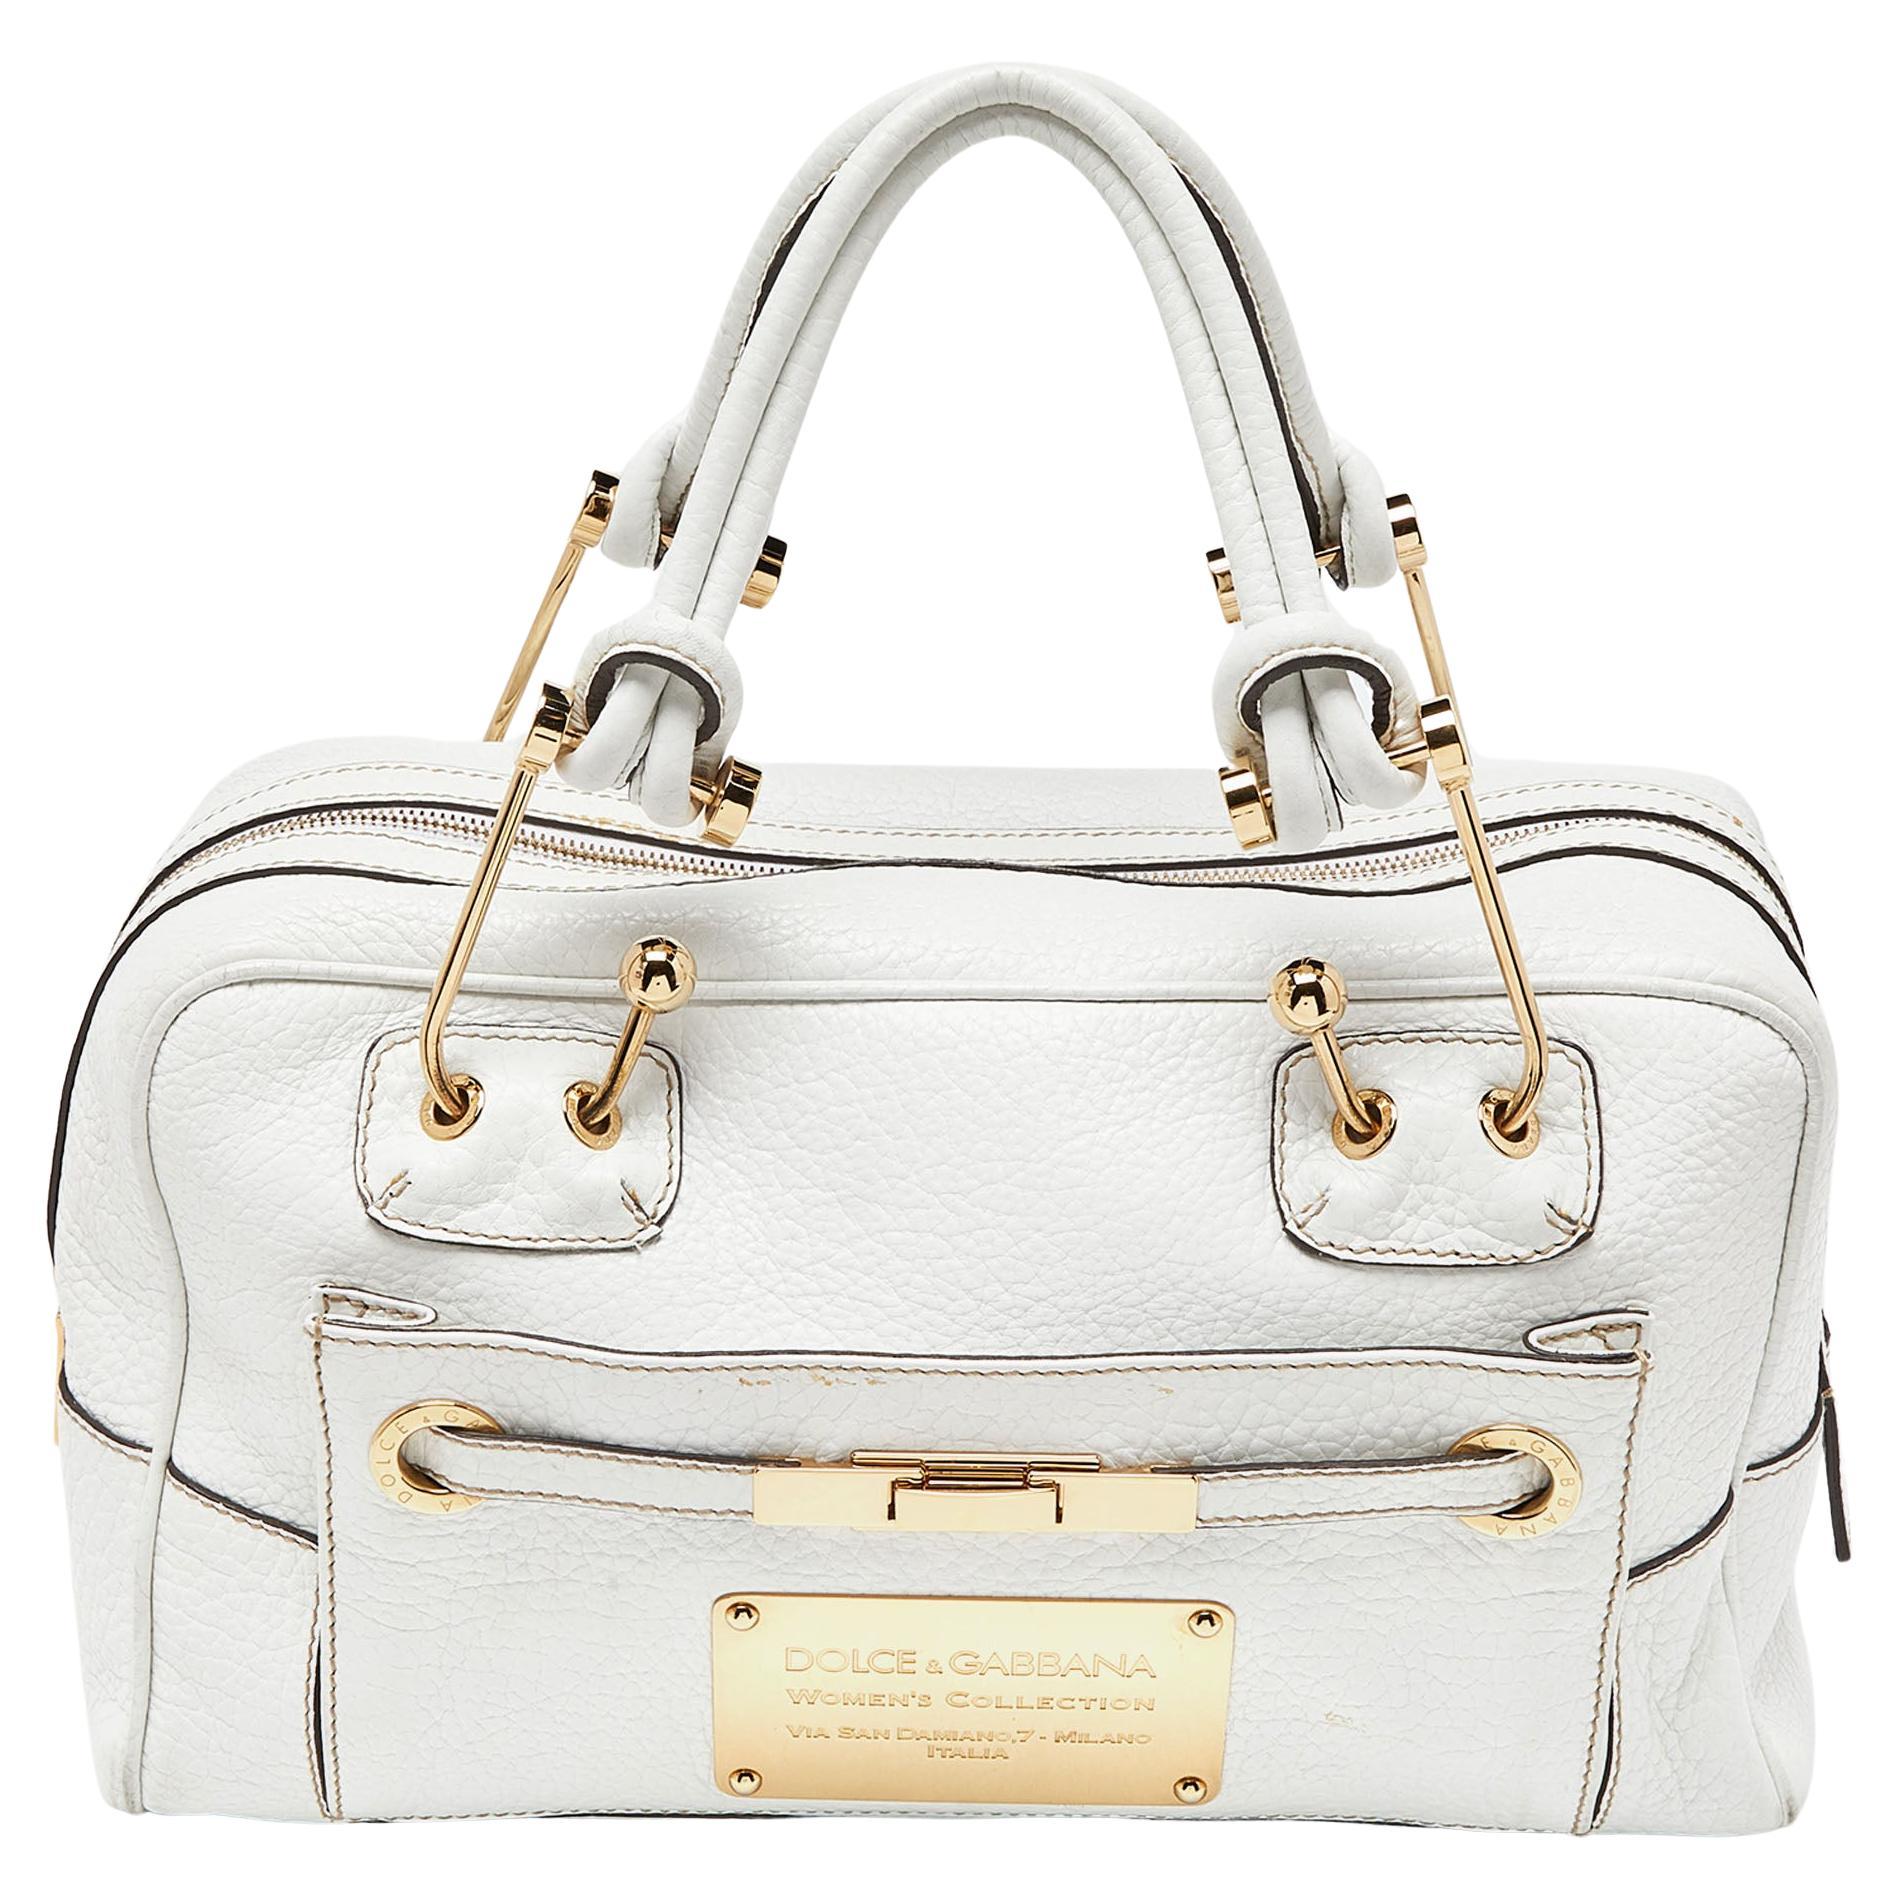 Dolce & Gabbana White Leather Buckle Satchel For Sale